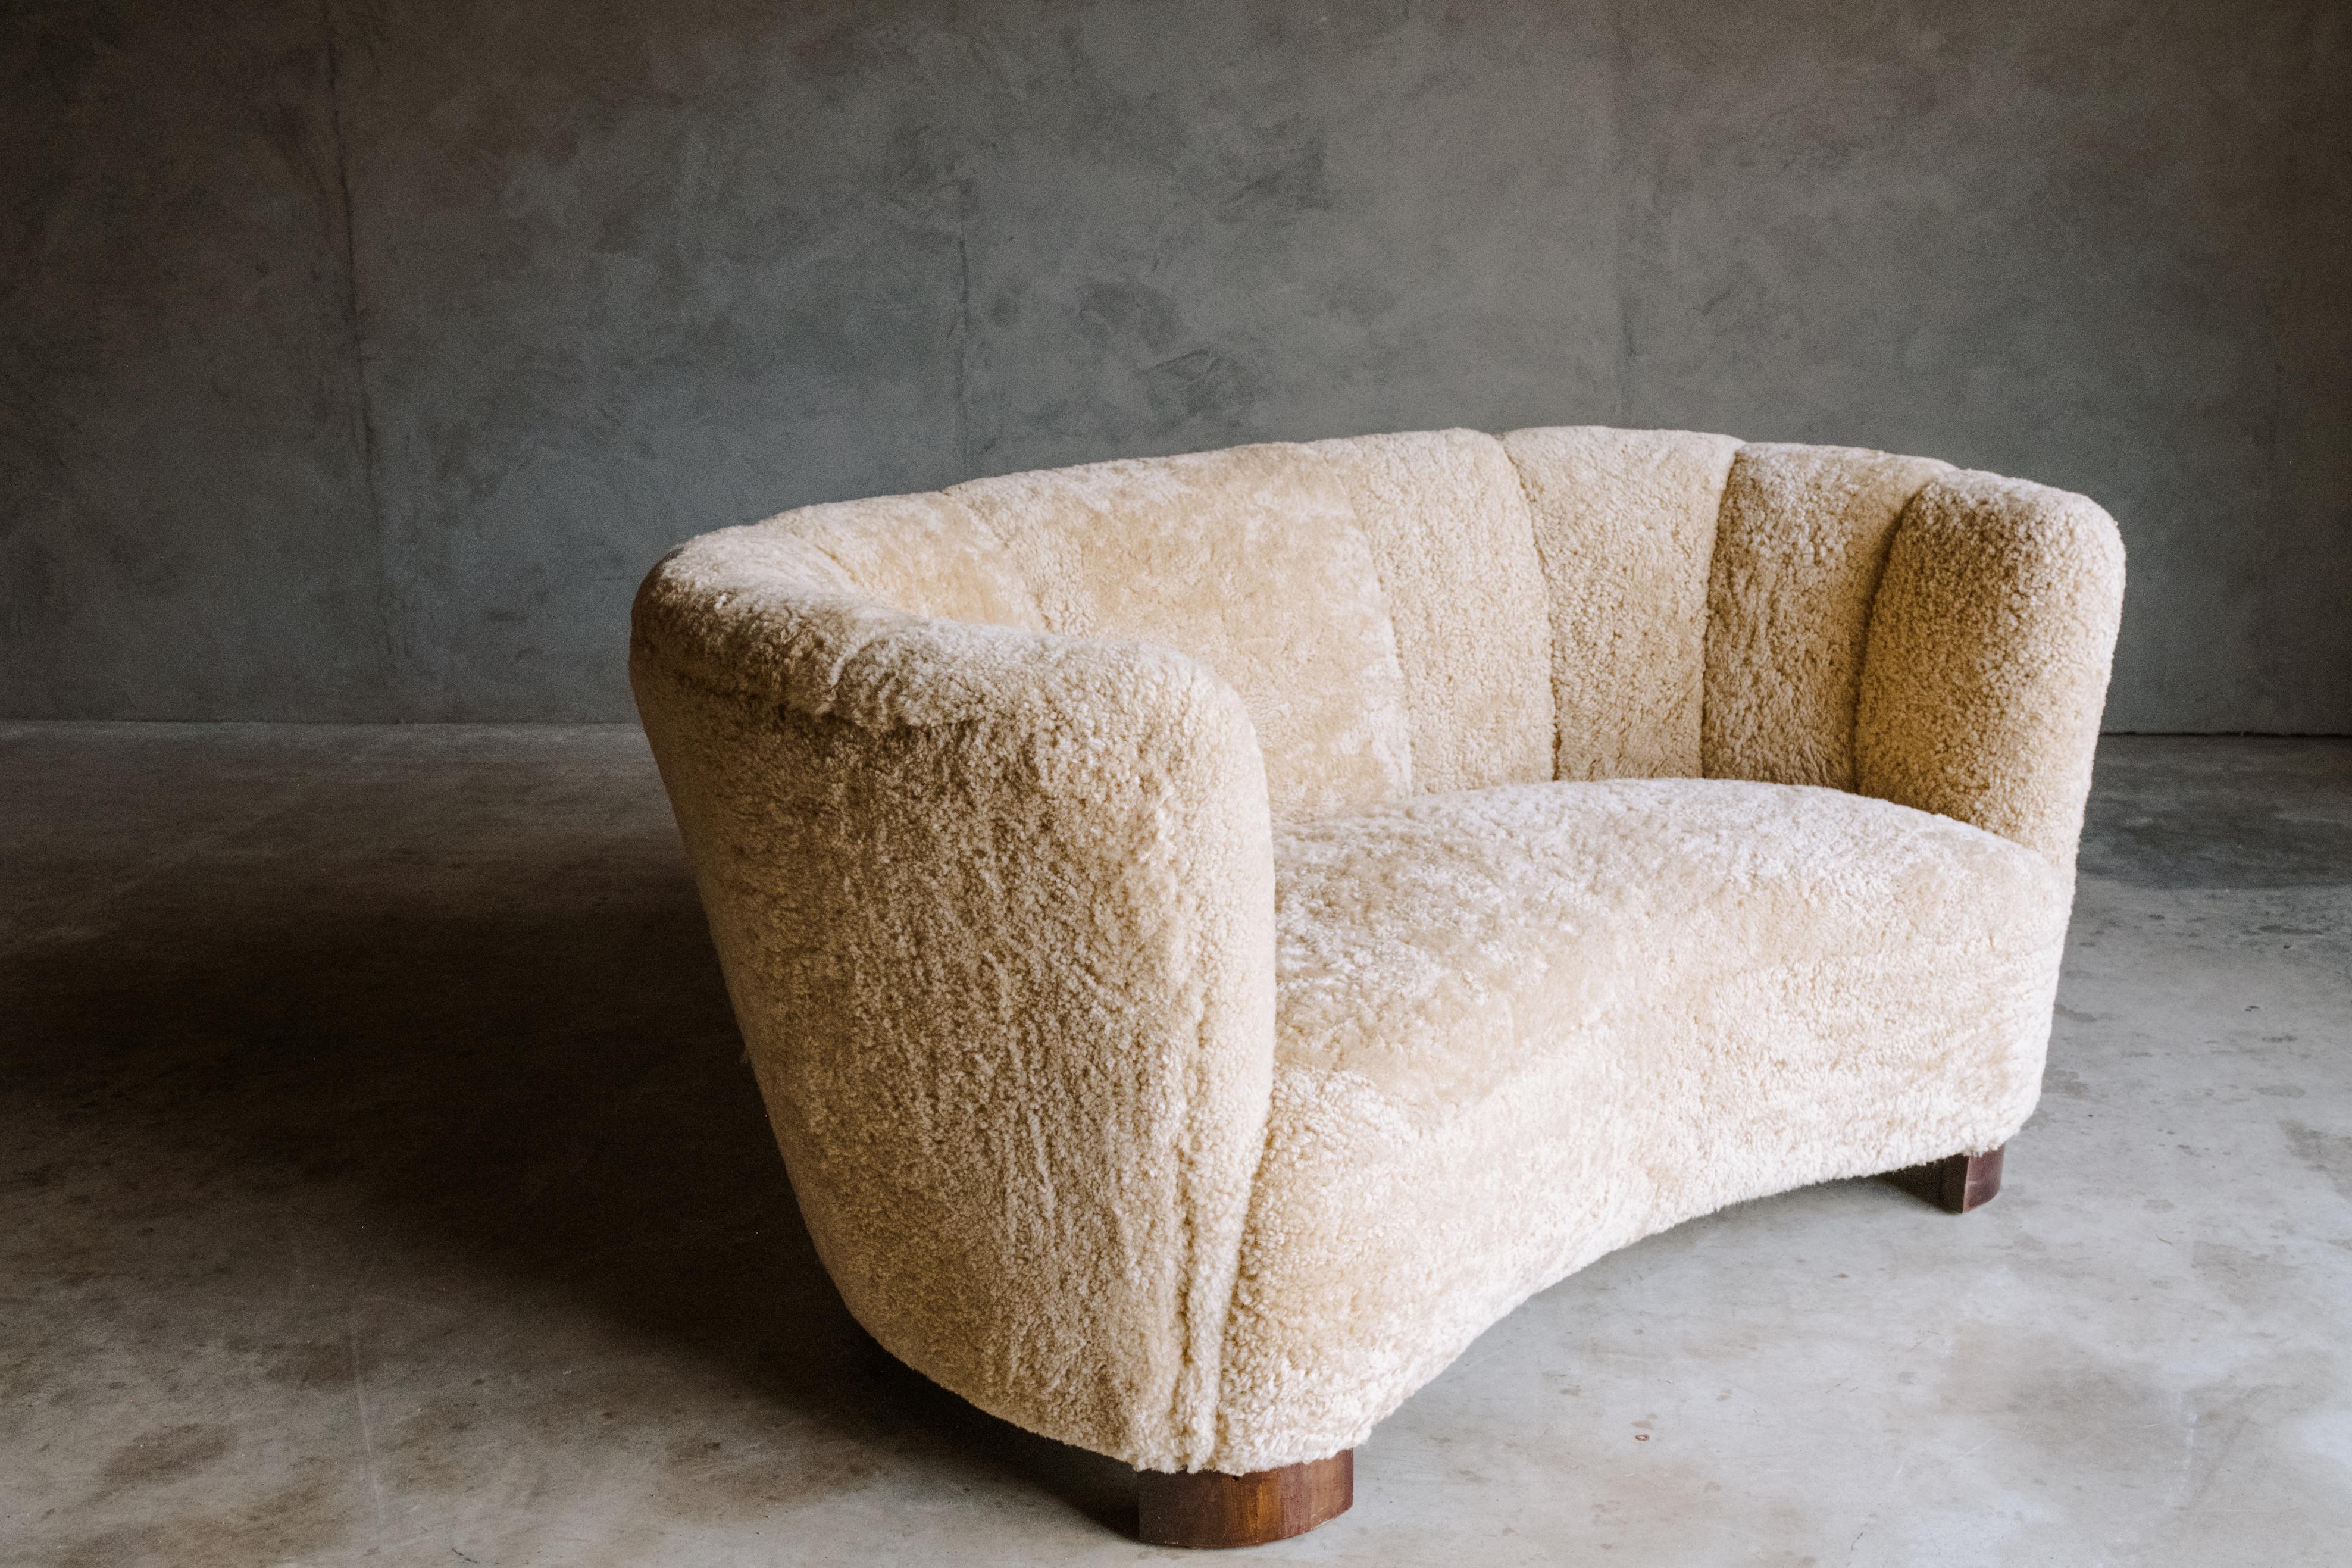 Vintage curved two seater sofa in sheepskin, From Denmark, Circa 1950. Danish cabinetmaker designed. Later professionally upholstered in Denmark. Very soft shearling in excellent condition.